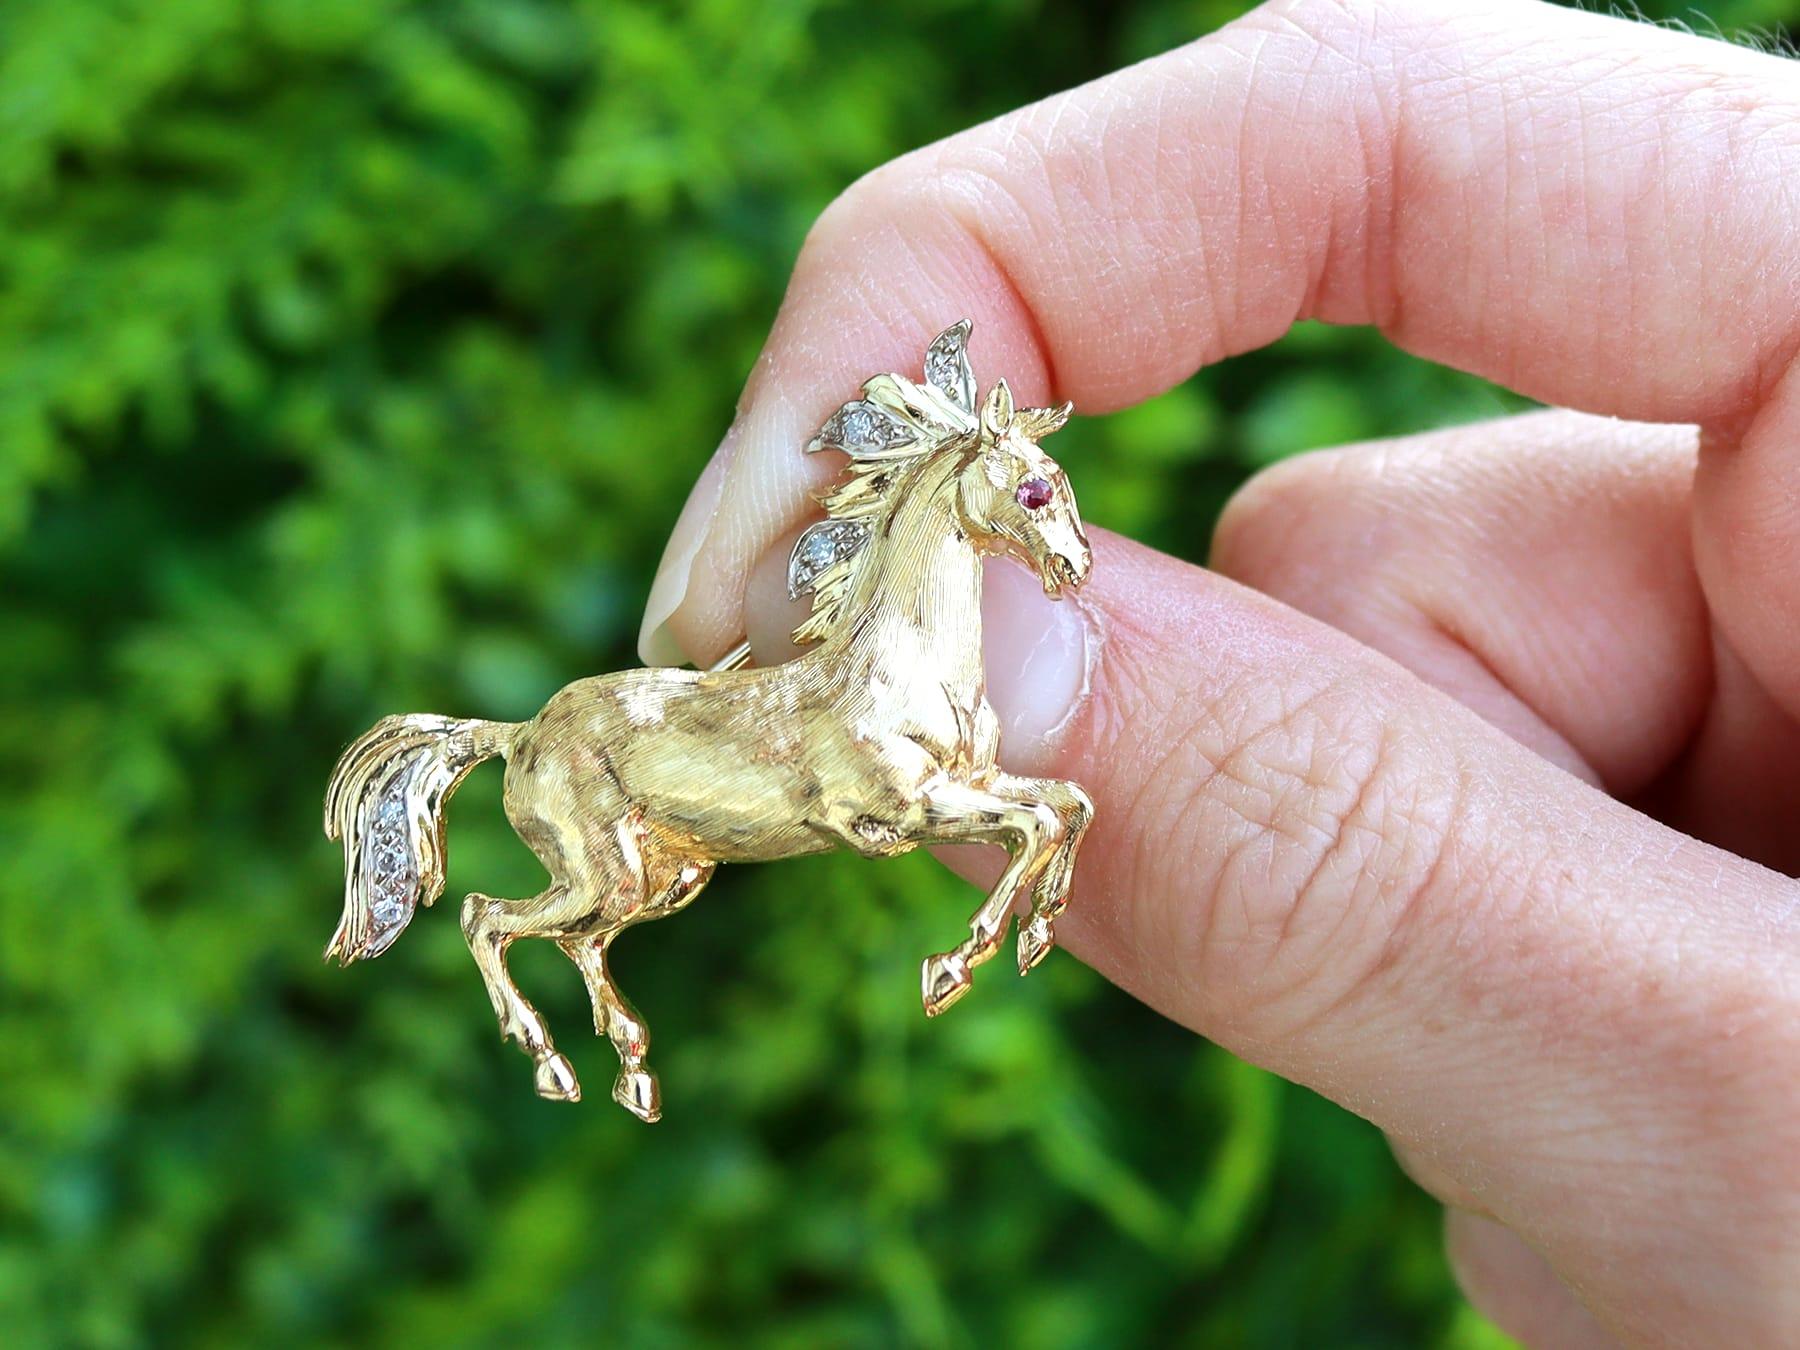 This fine and impressive vintage horse brooch has been crafted in 18k yellow gold.

The vintage brooch has been realistically modelled in the form of a galloping horse.

The body of the horse is embellished with a textured finish.

The horse's mane